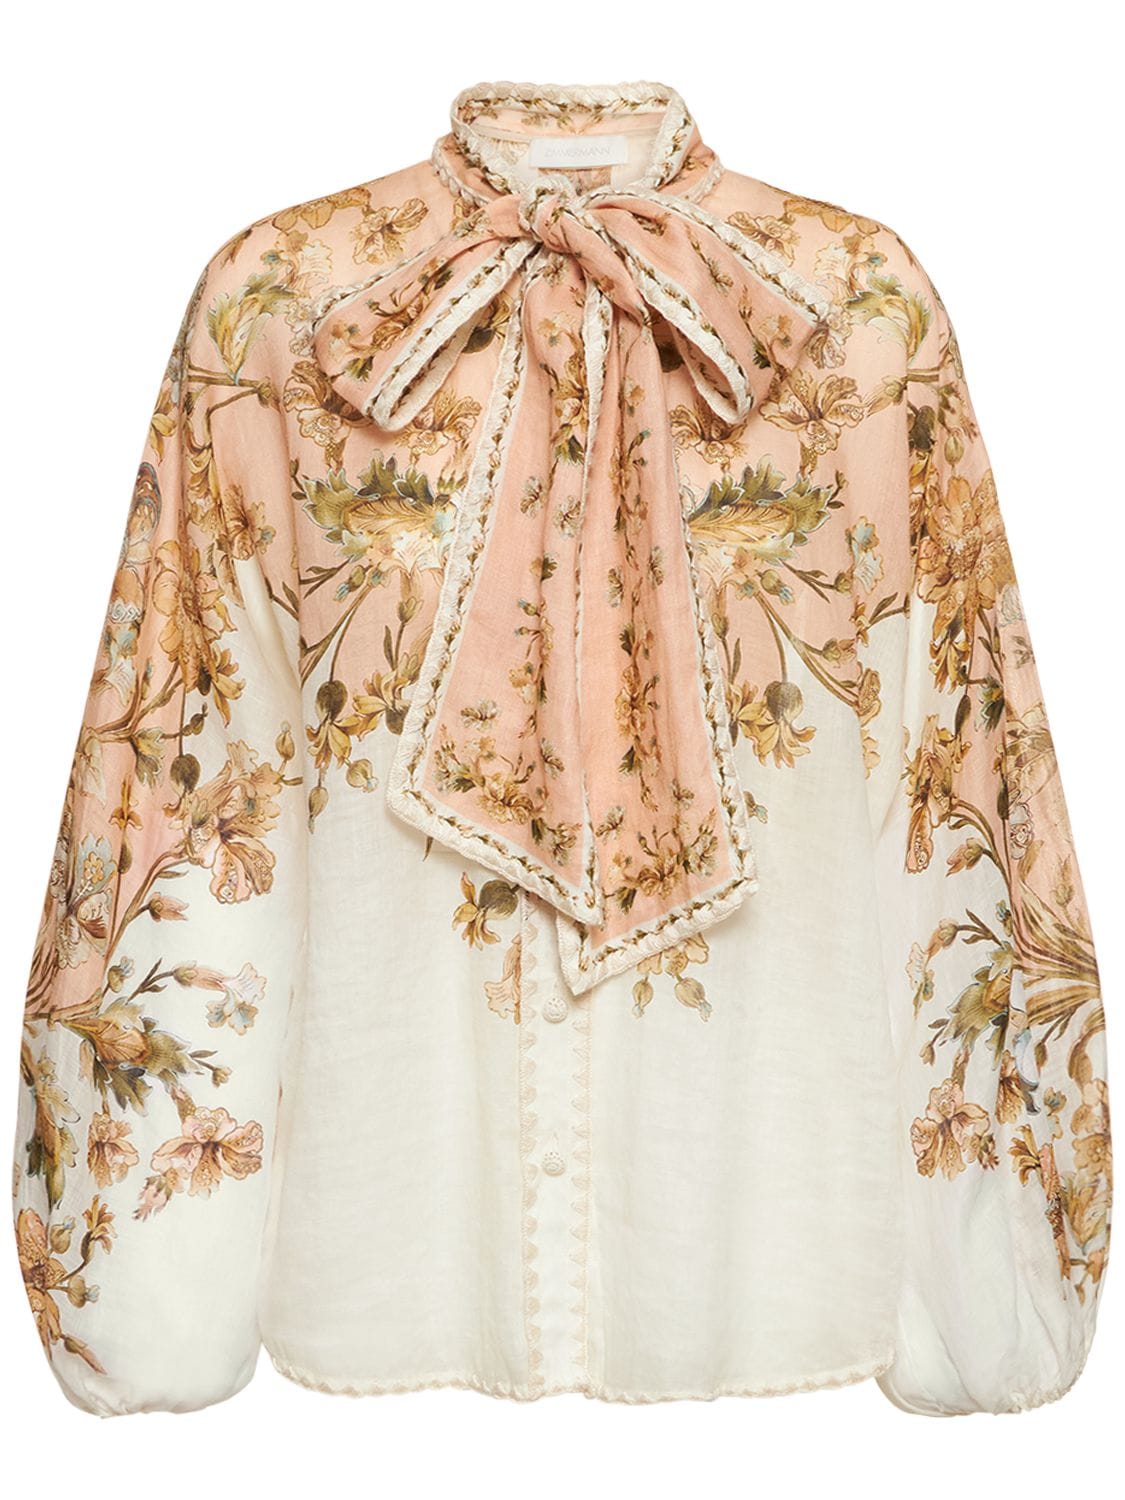 Image of Chintz Floral Print Ramie Blouse